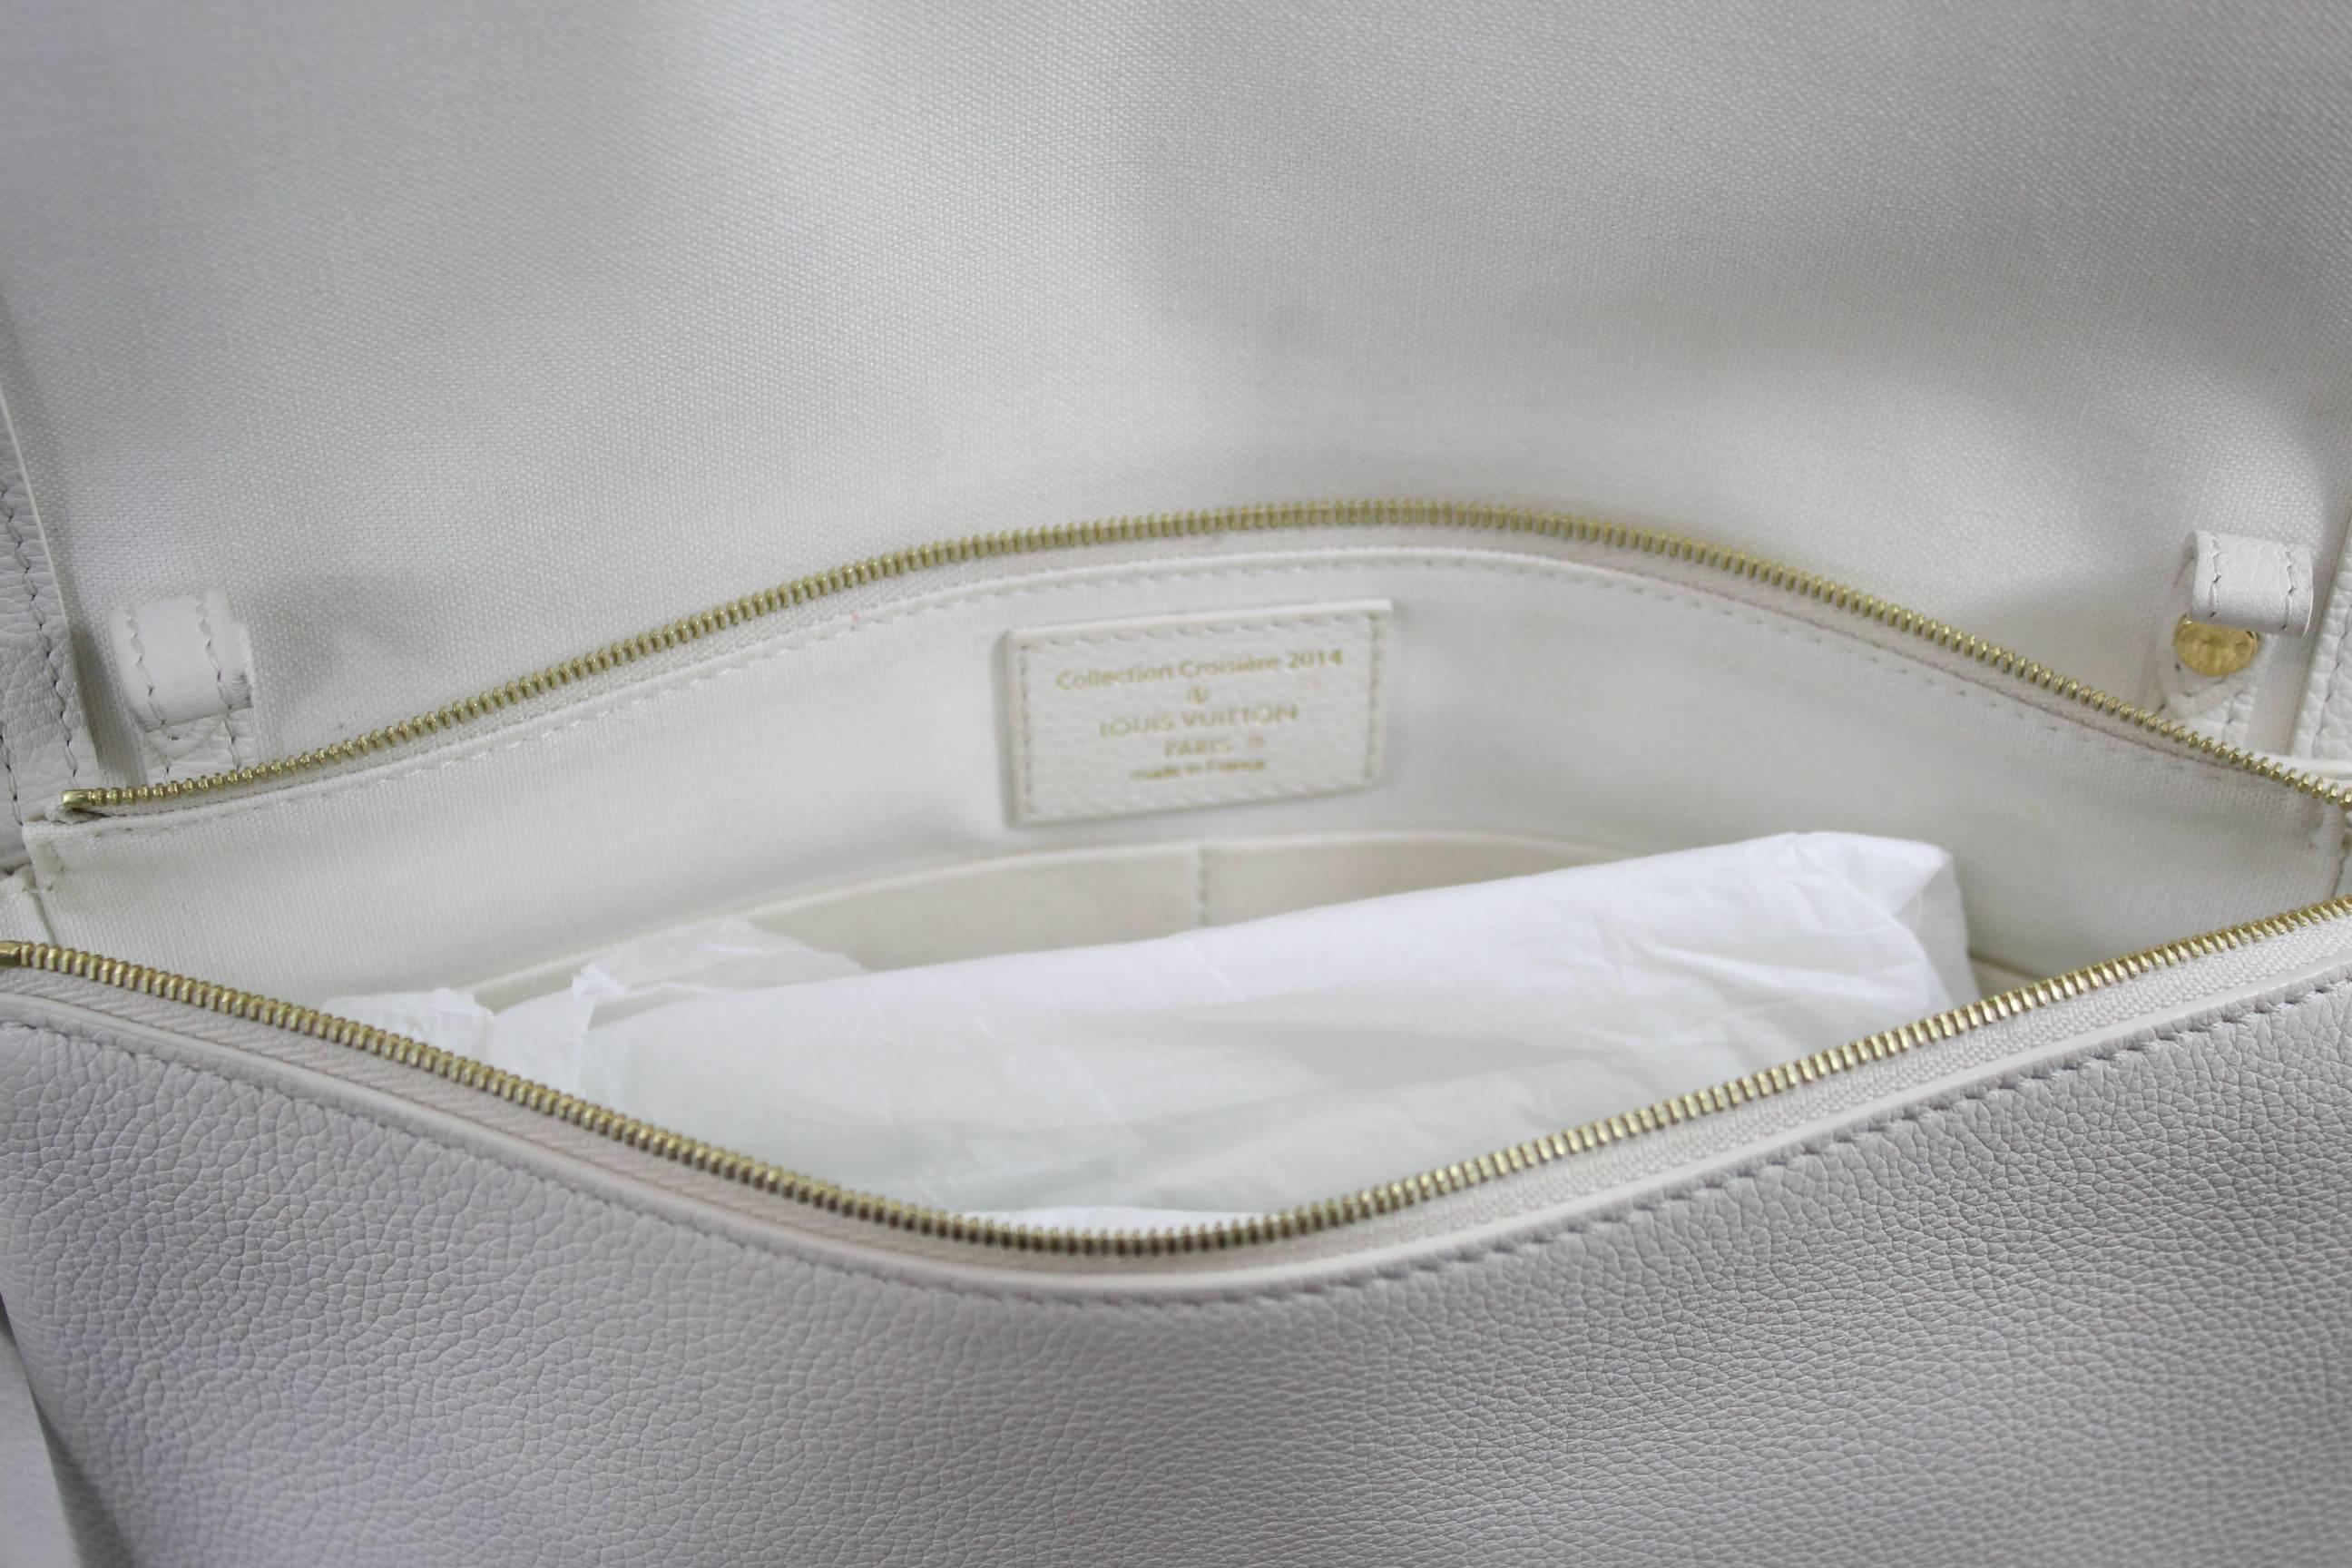 Louis Vuitton 2014 Monaco Cruise Collection White Grained Leather Bag For Sale 3